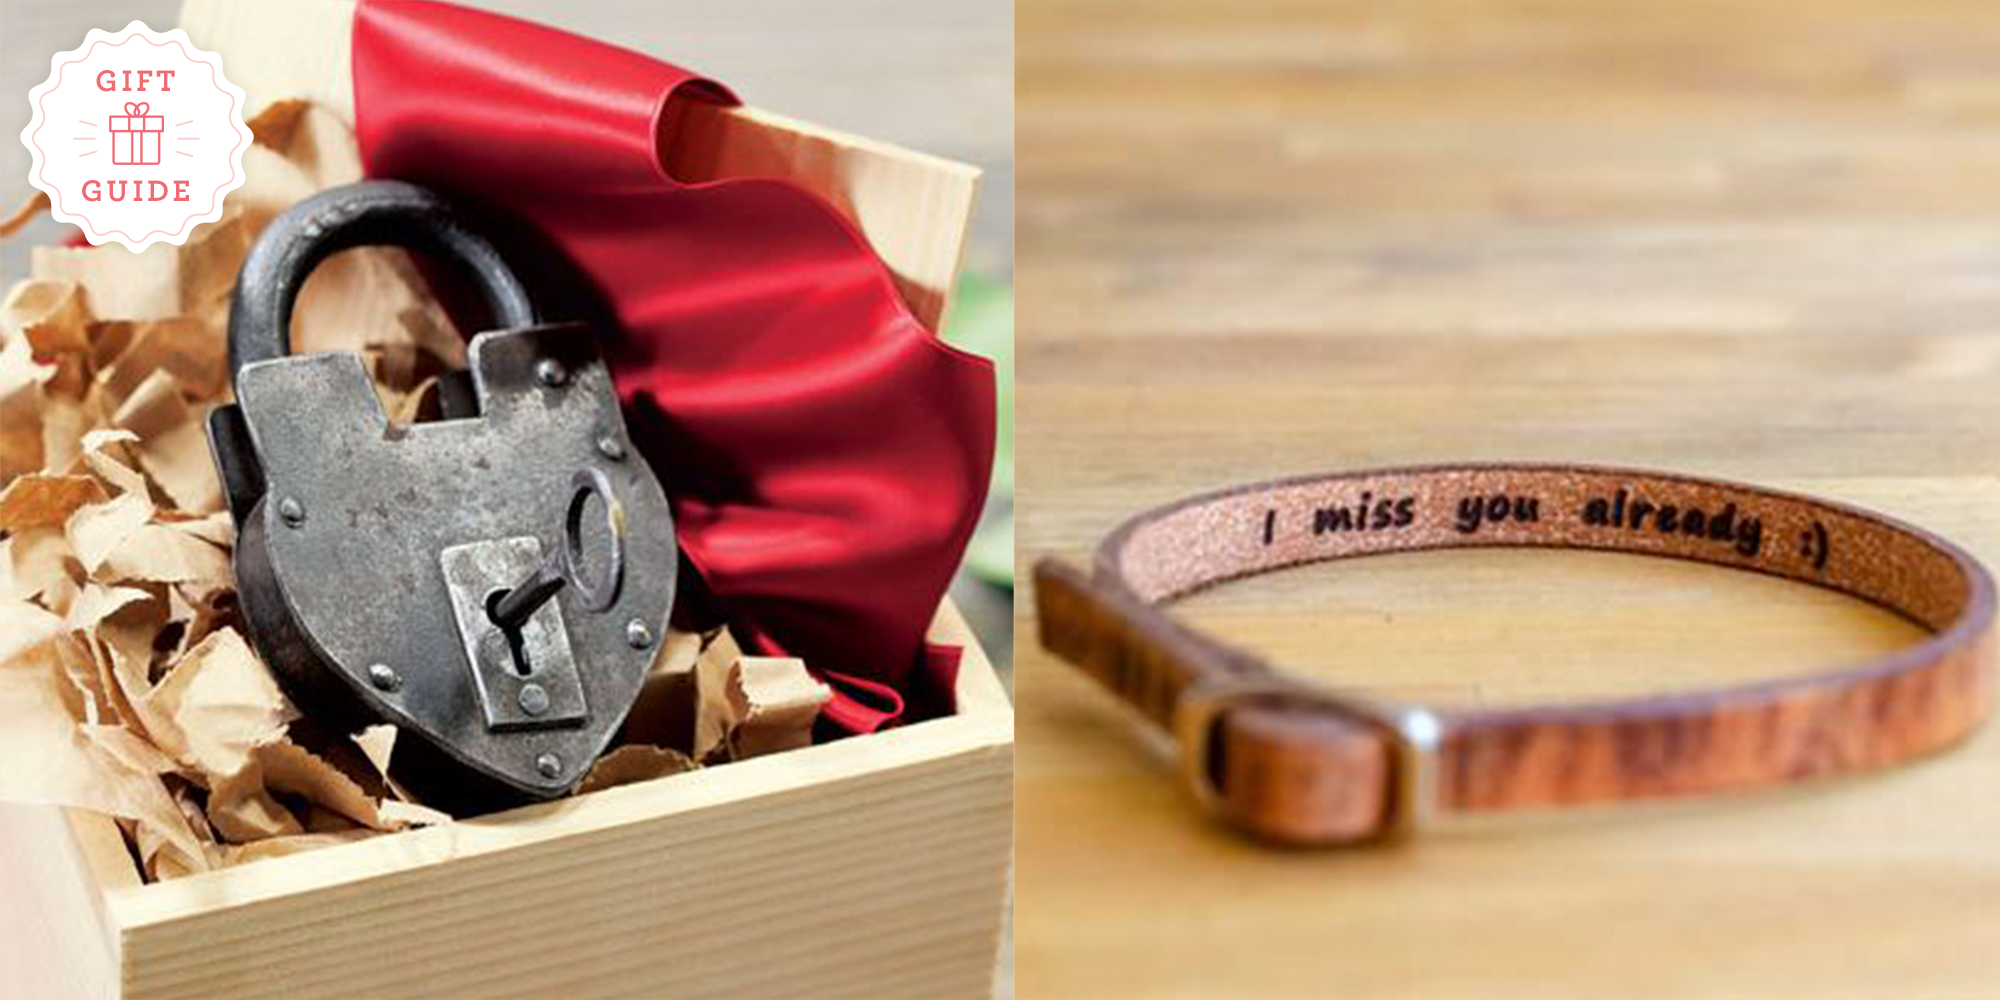 perfect gifts for long distance relationship